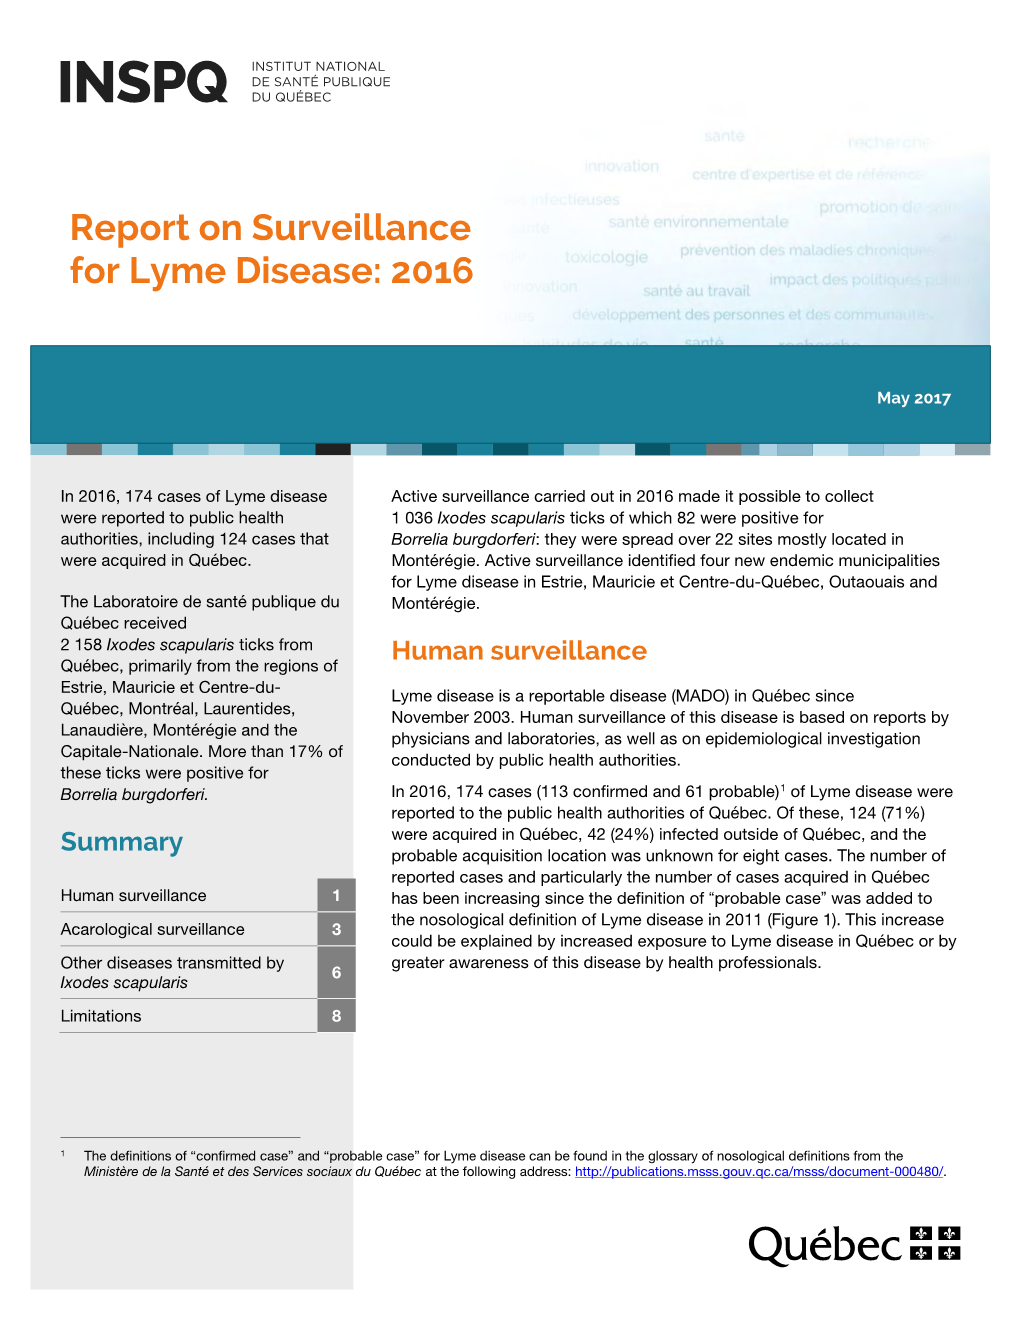 Report on Surveillance for Lyme Disease: 2016